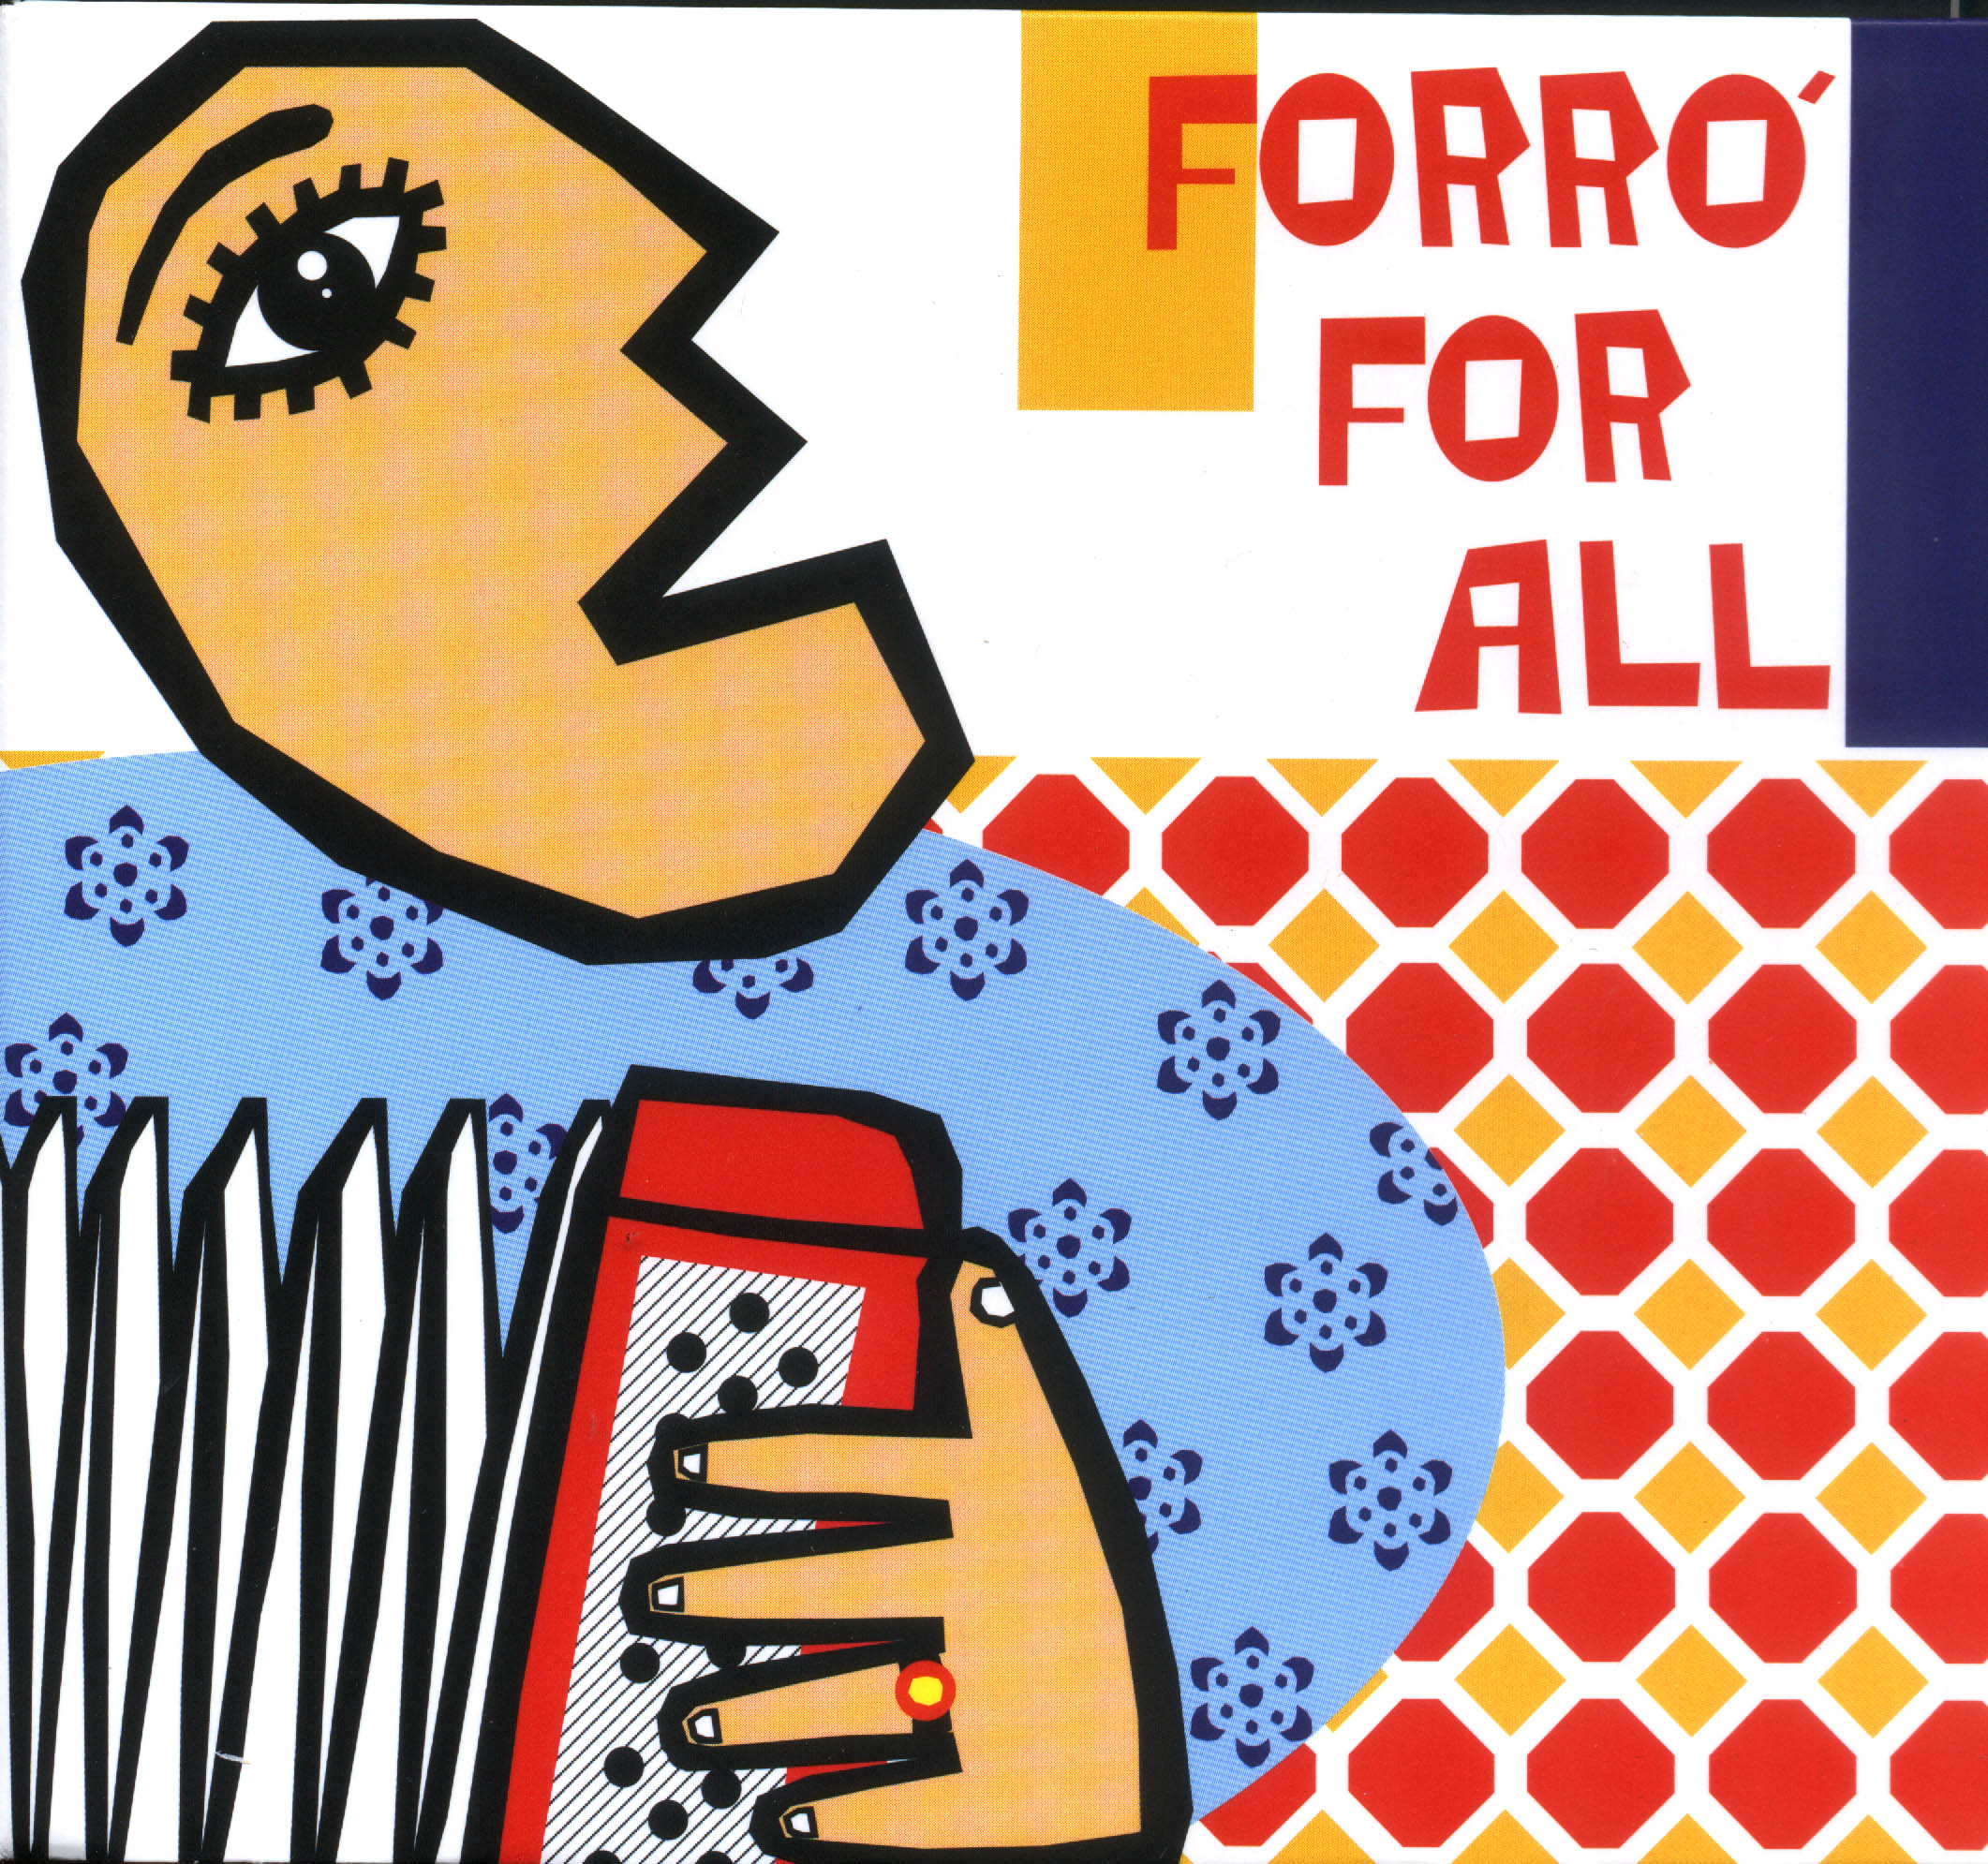 Forro For All: Forro For All